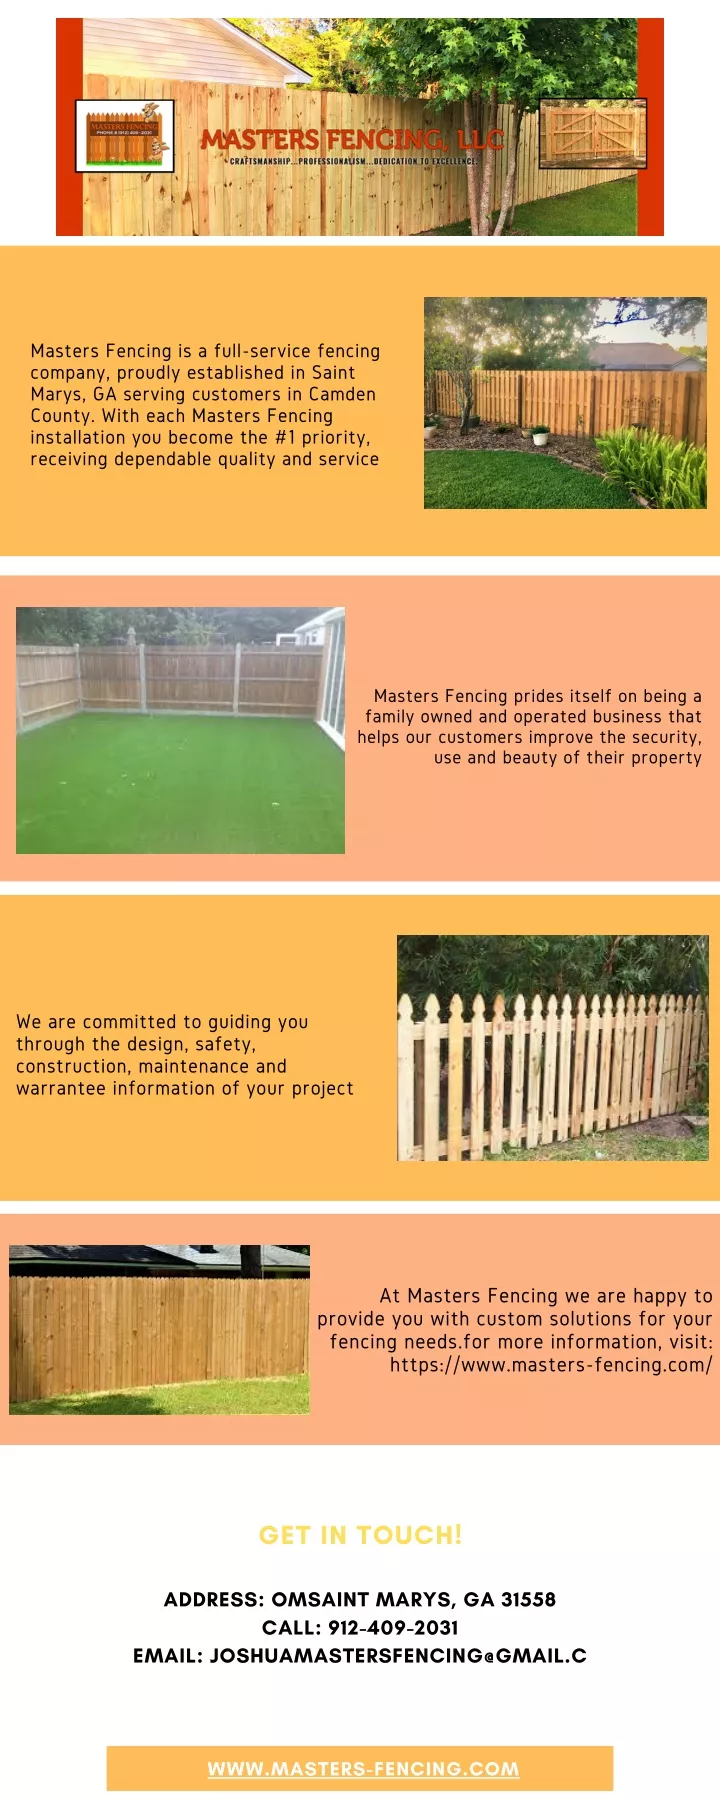 masters fencing is a full service fencing company